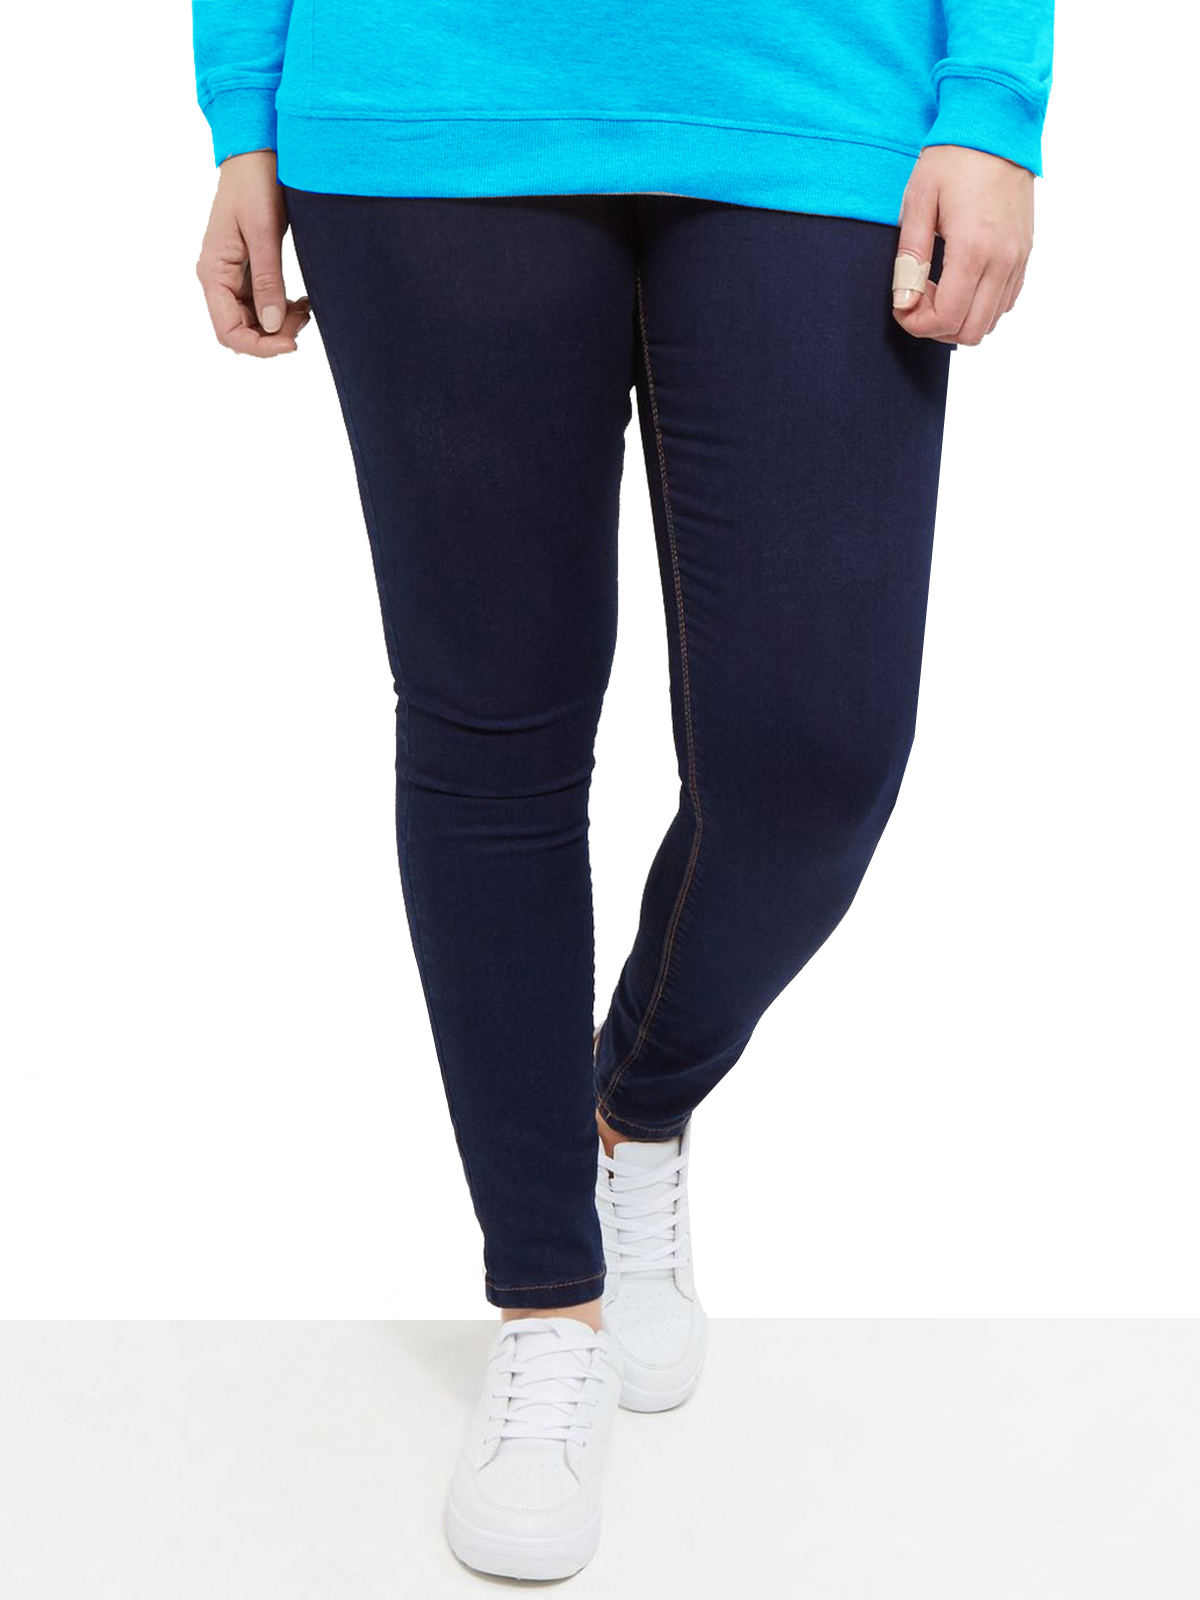 Jean Leggings With Pockets Plus Size Tops